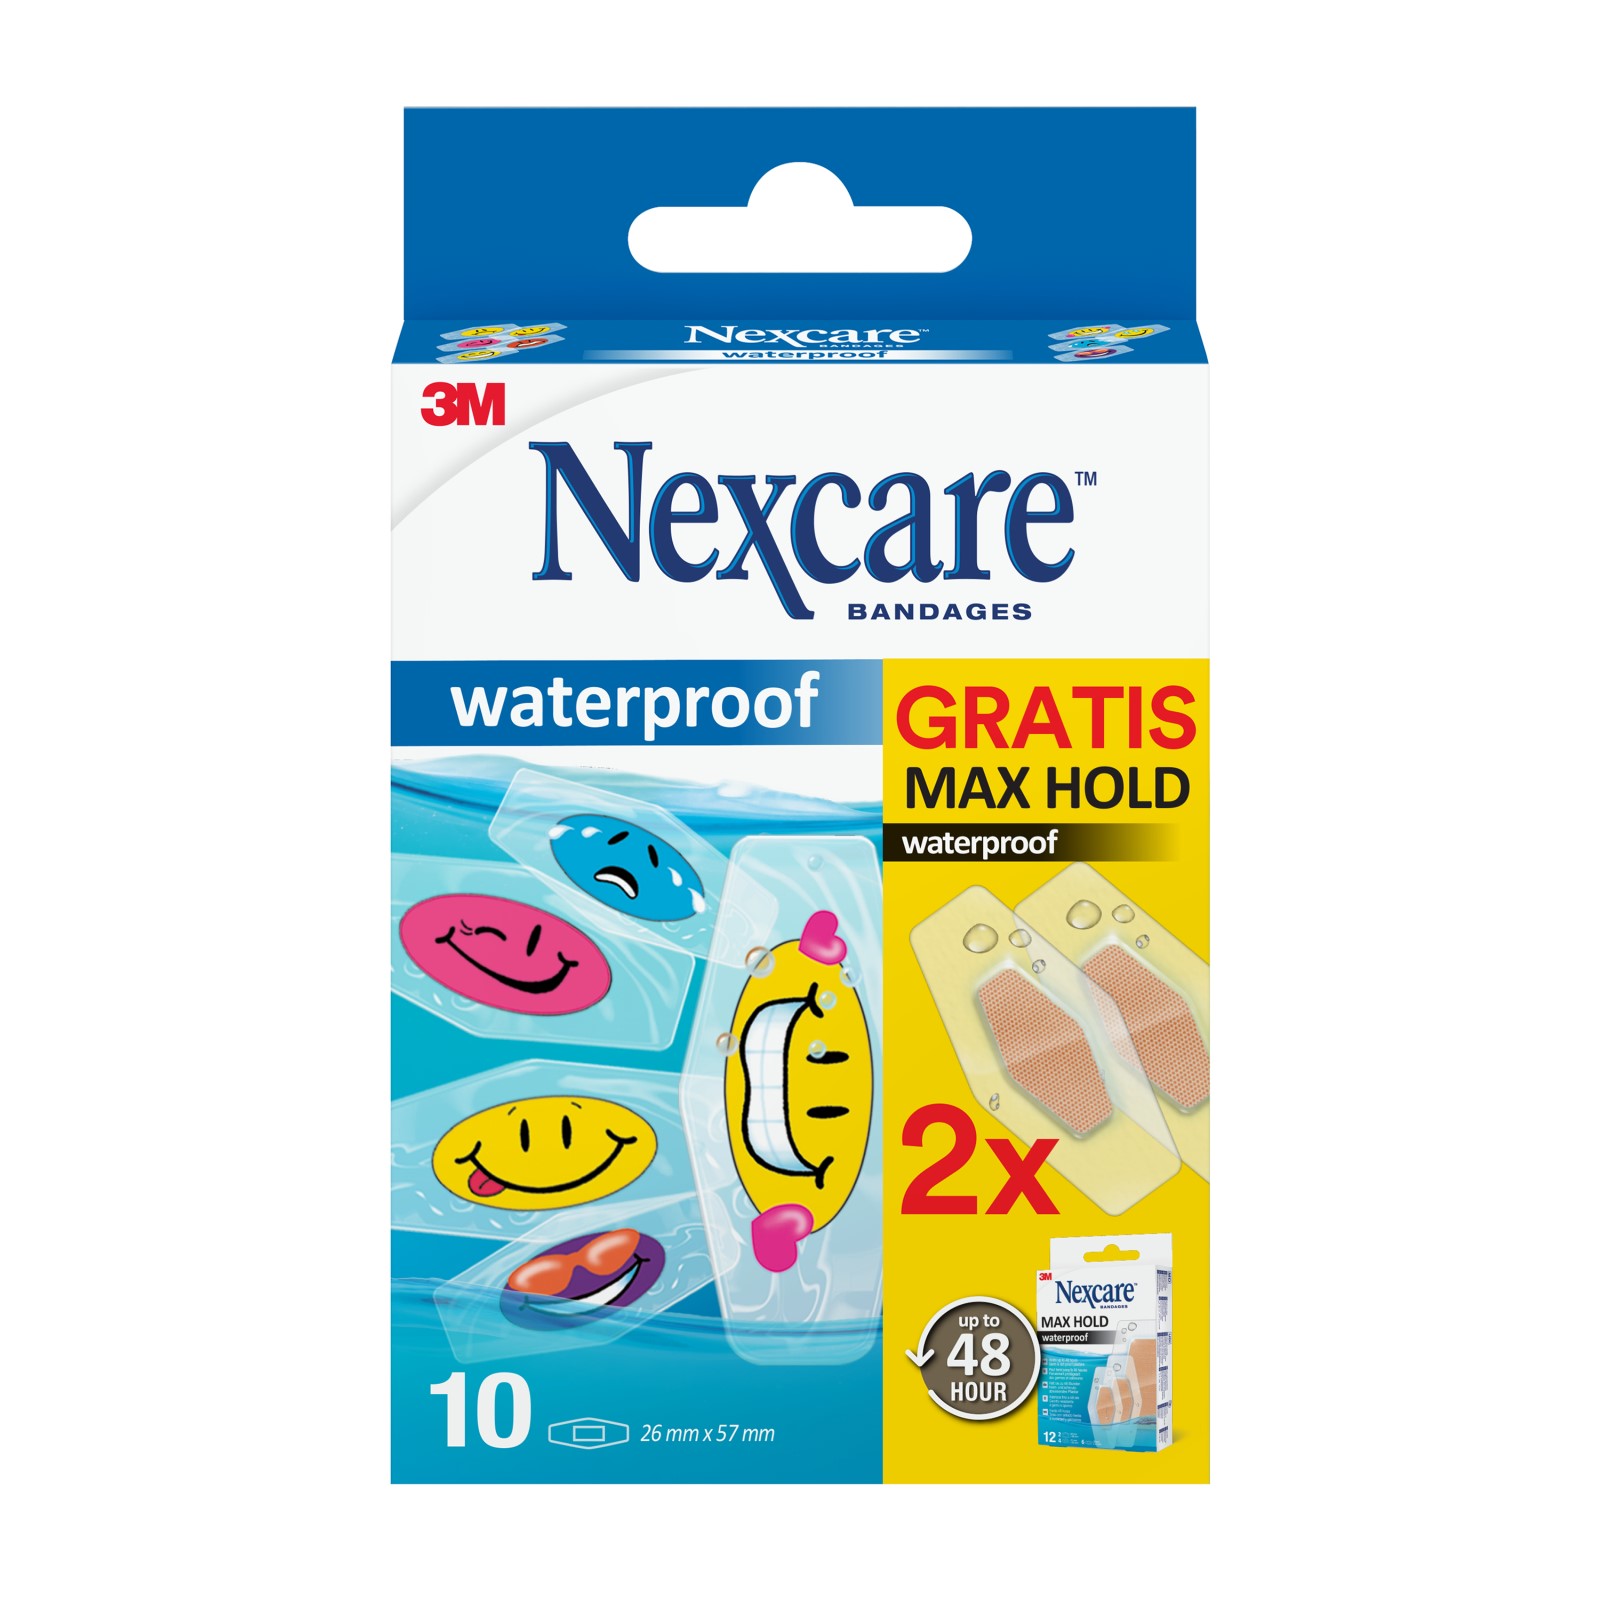 Nexcare™ Waterproof Tattoo Pflaster, 26 mm × 57 mm, 10/Packung + 2 Nexcare™ Max Hold GRATIS